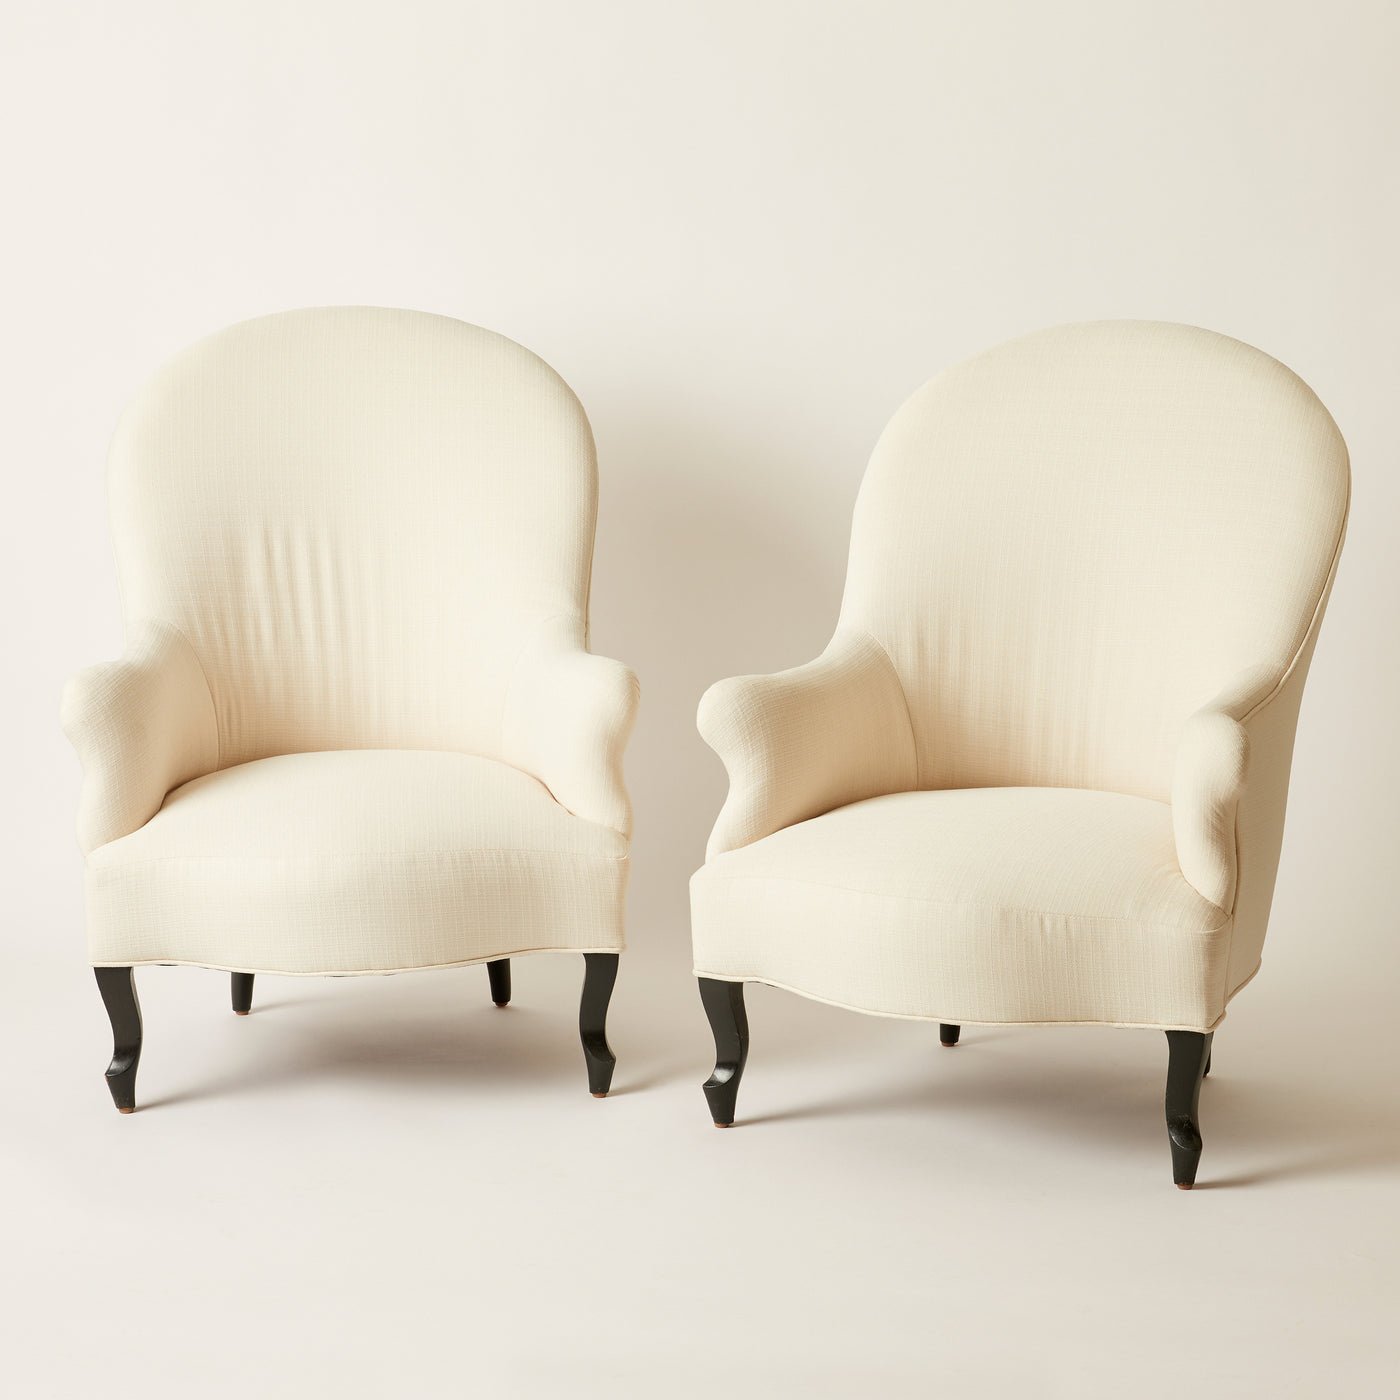 Pair Of Napoleon LII Chairs Reupholstered In Linen, French 19Th C.